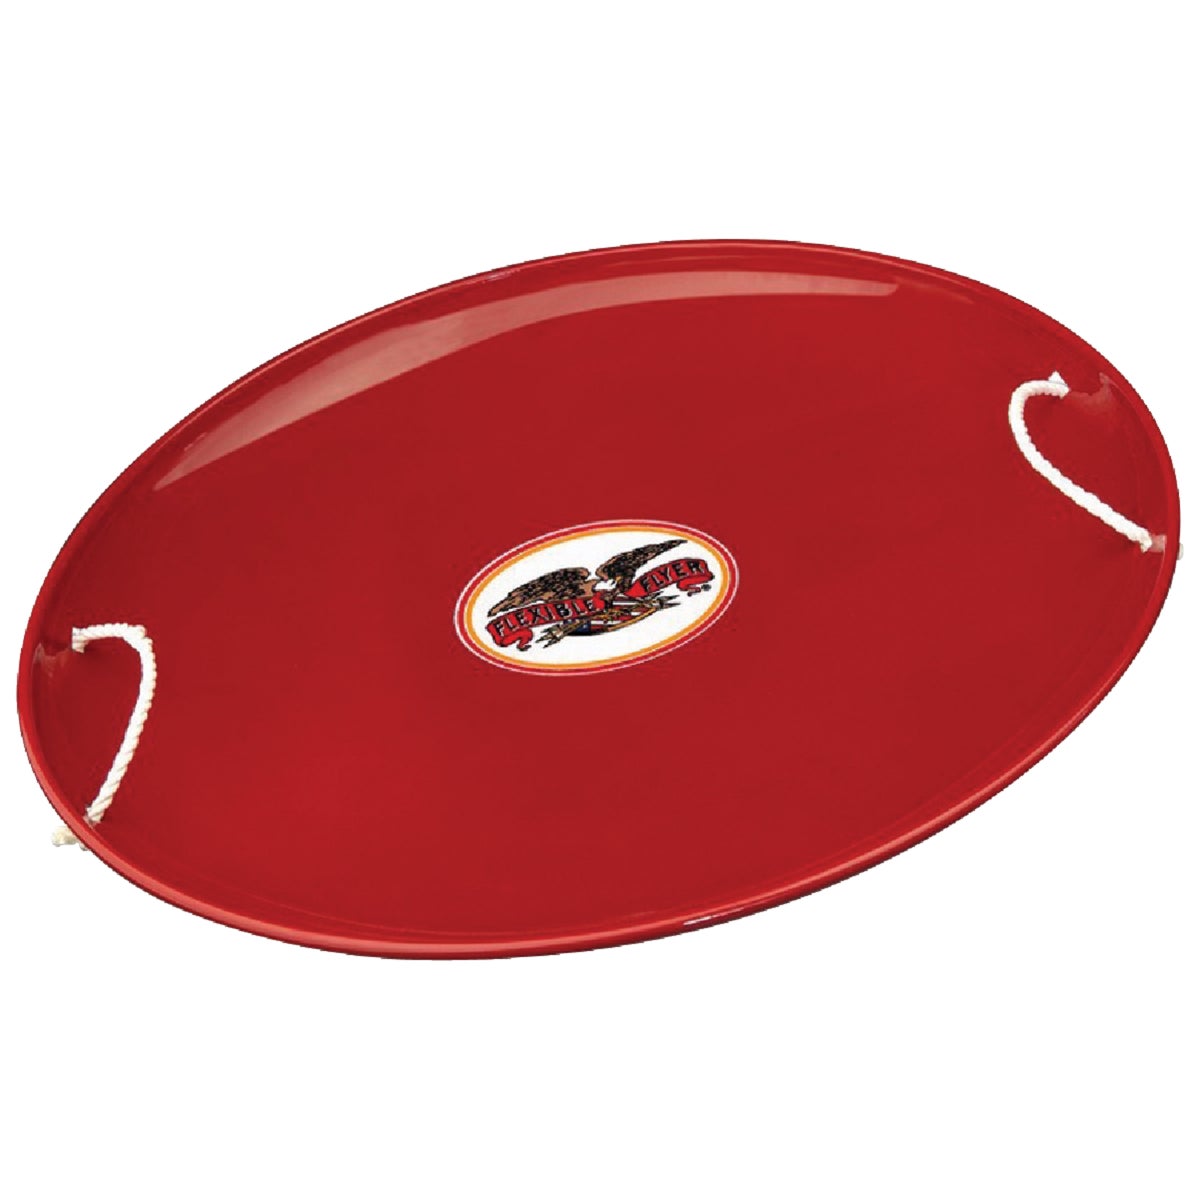 Item 823848, Classic steel saucer with rope handles and smoothly rolled edges.